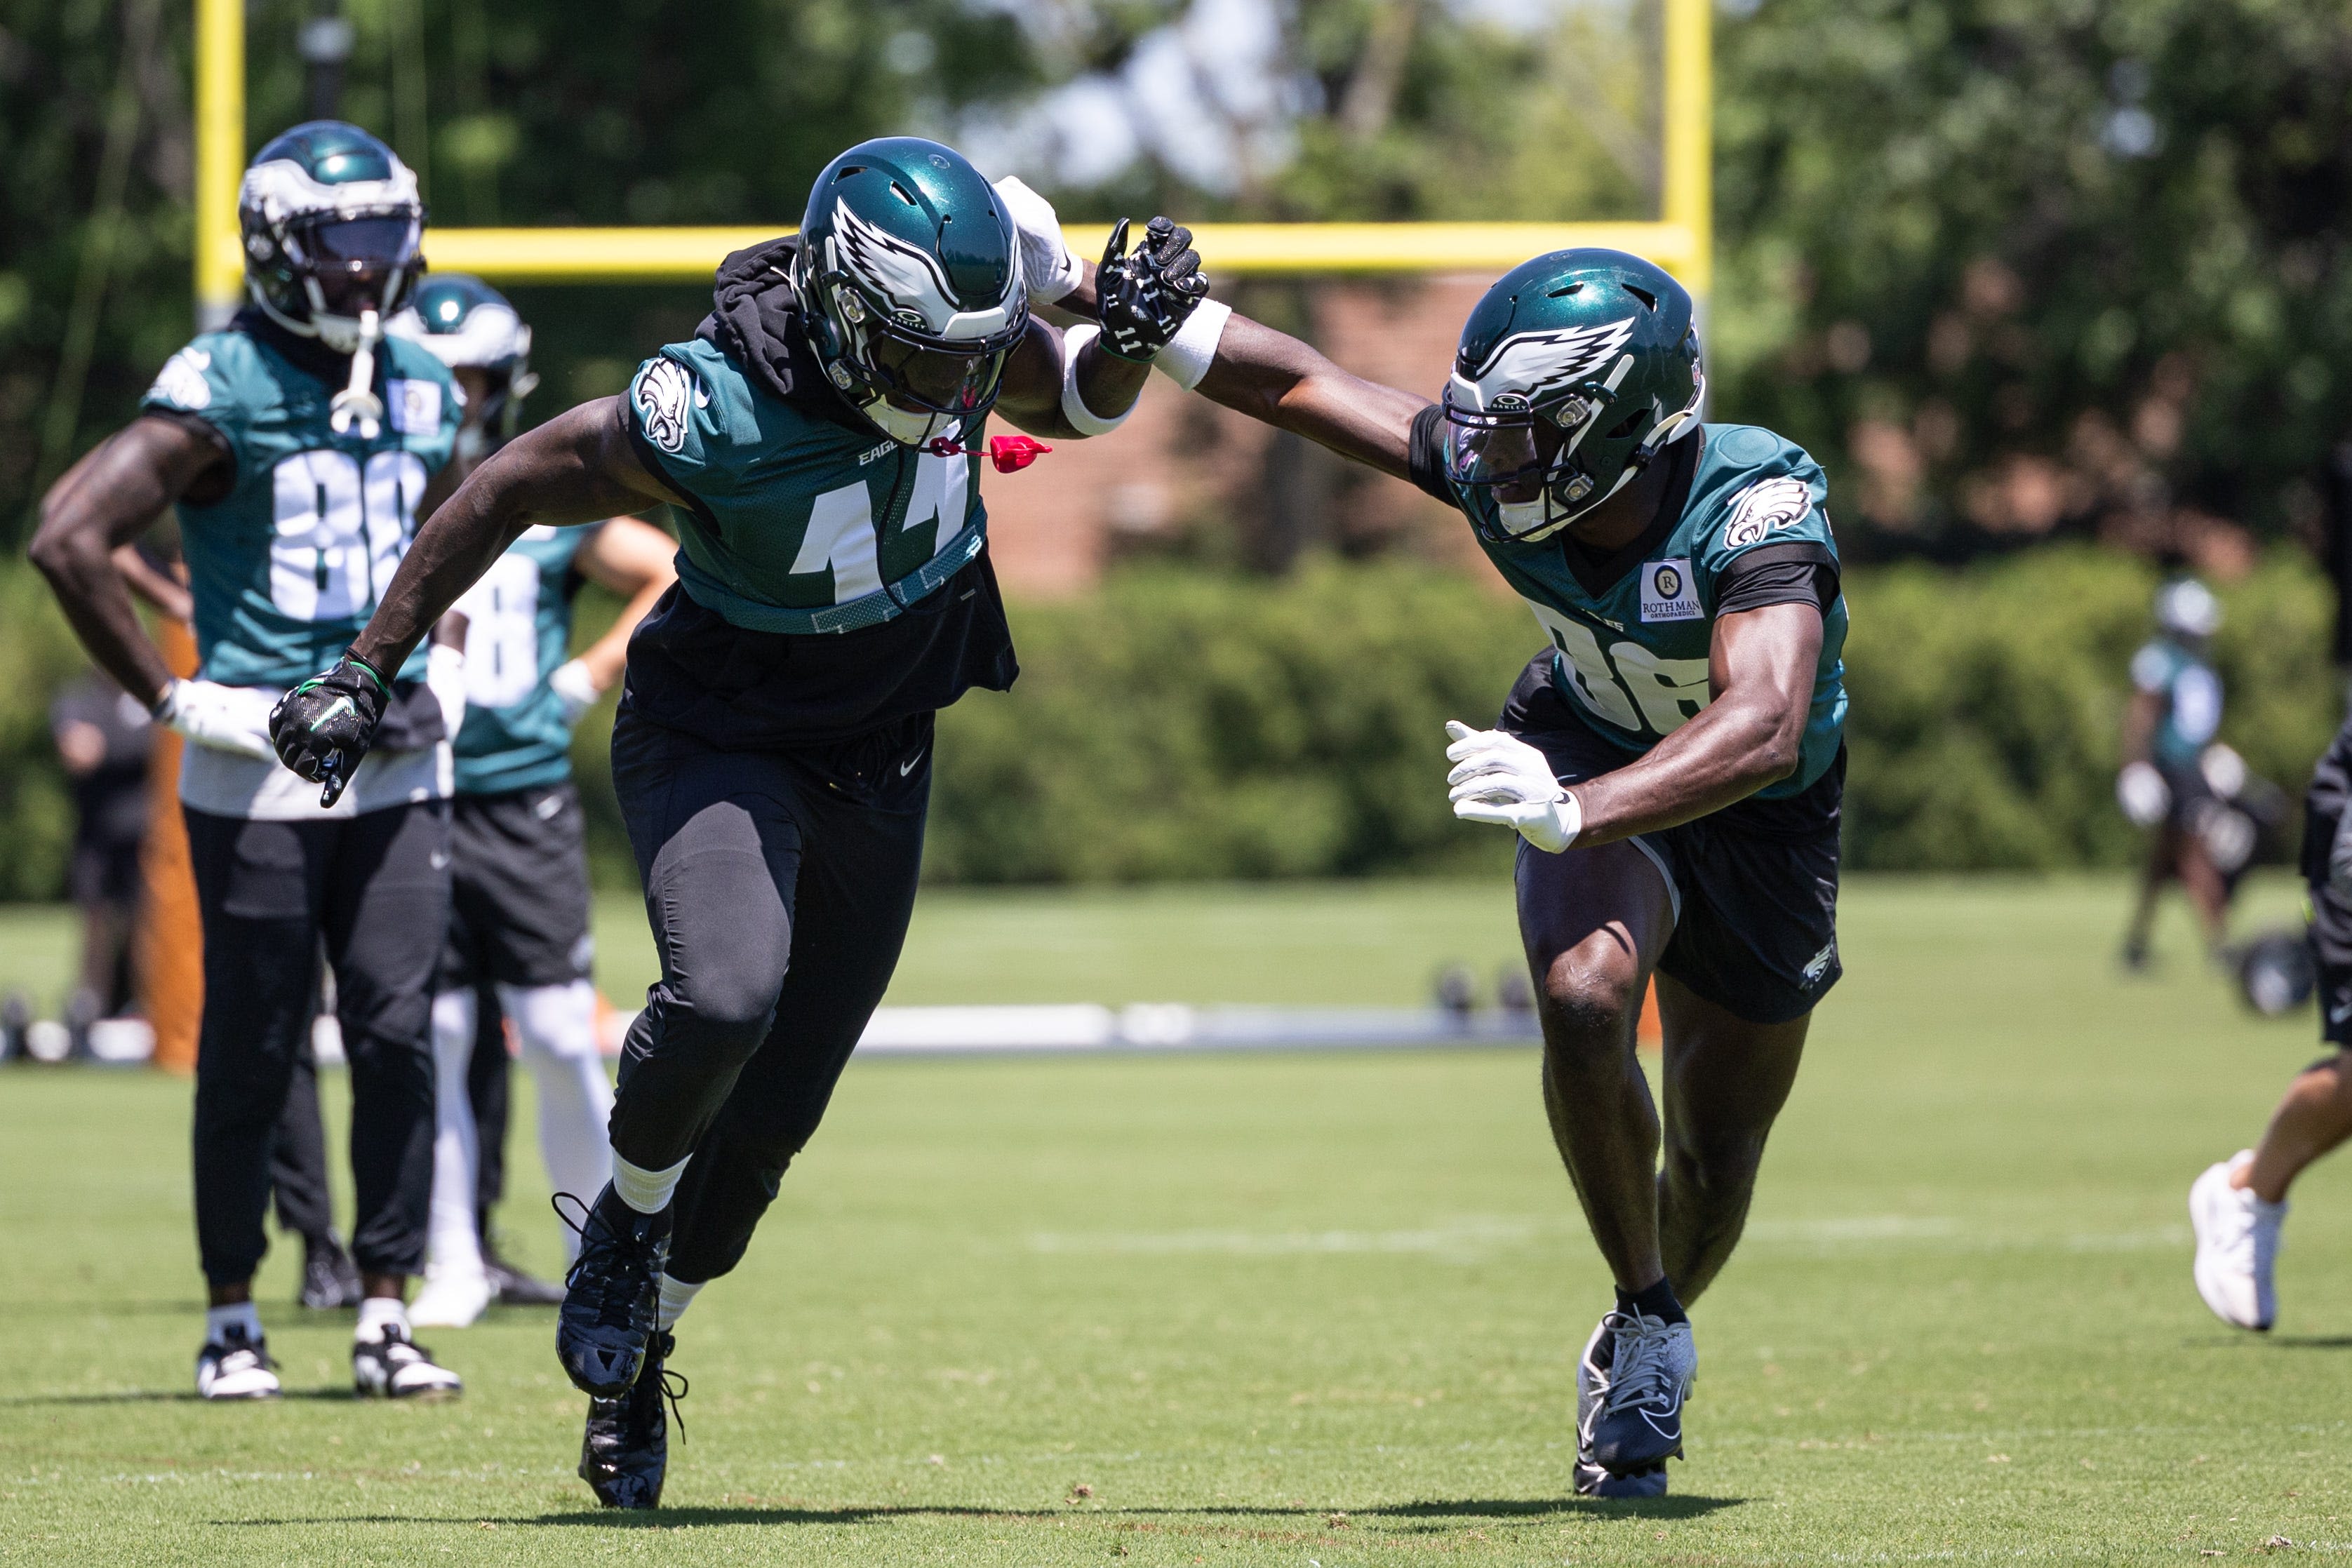 Are Eagles wrong to rely on 2 speedy, disappointing vets as 3rd WR? One last played in 2021